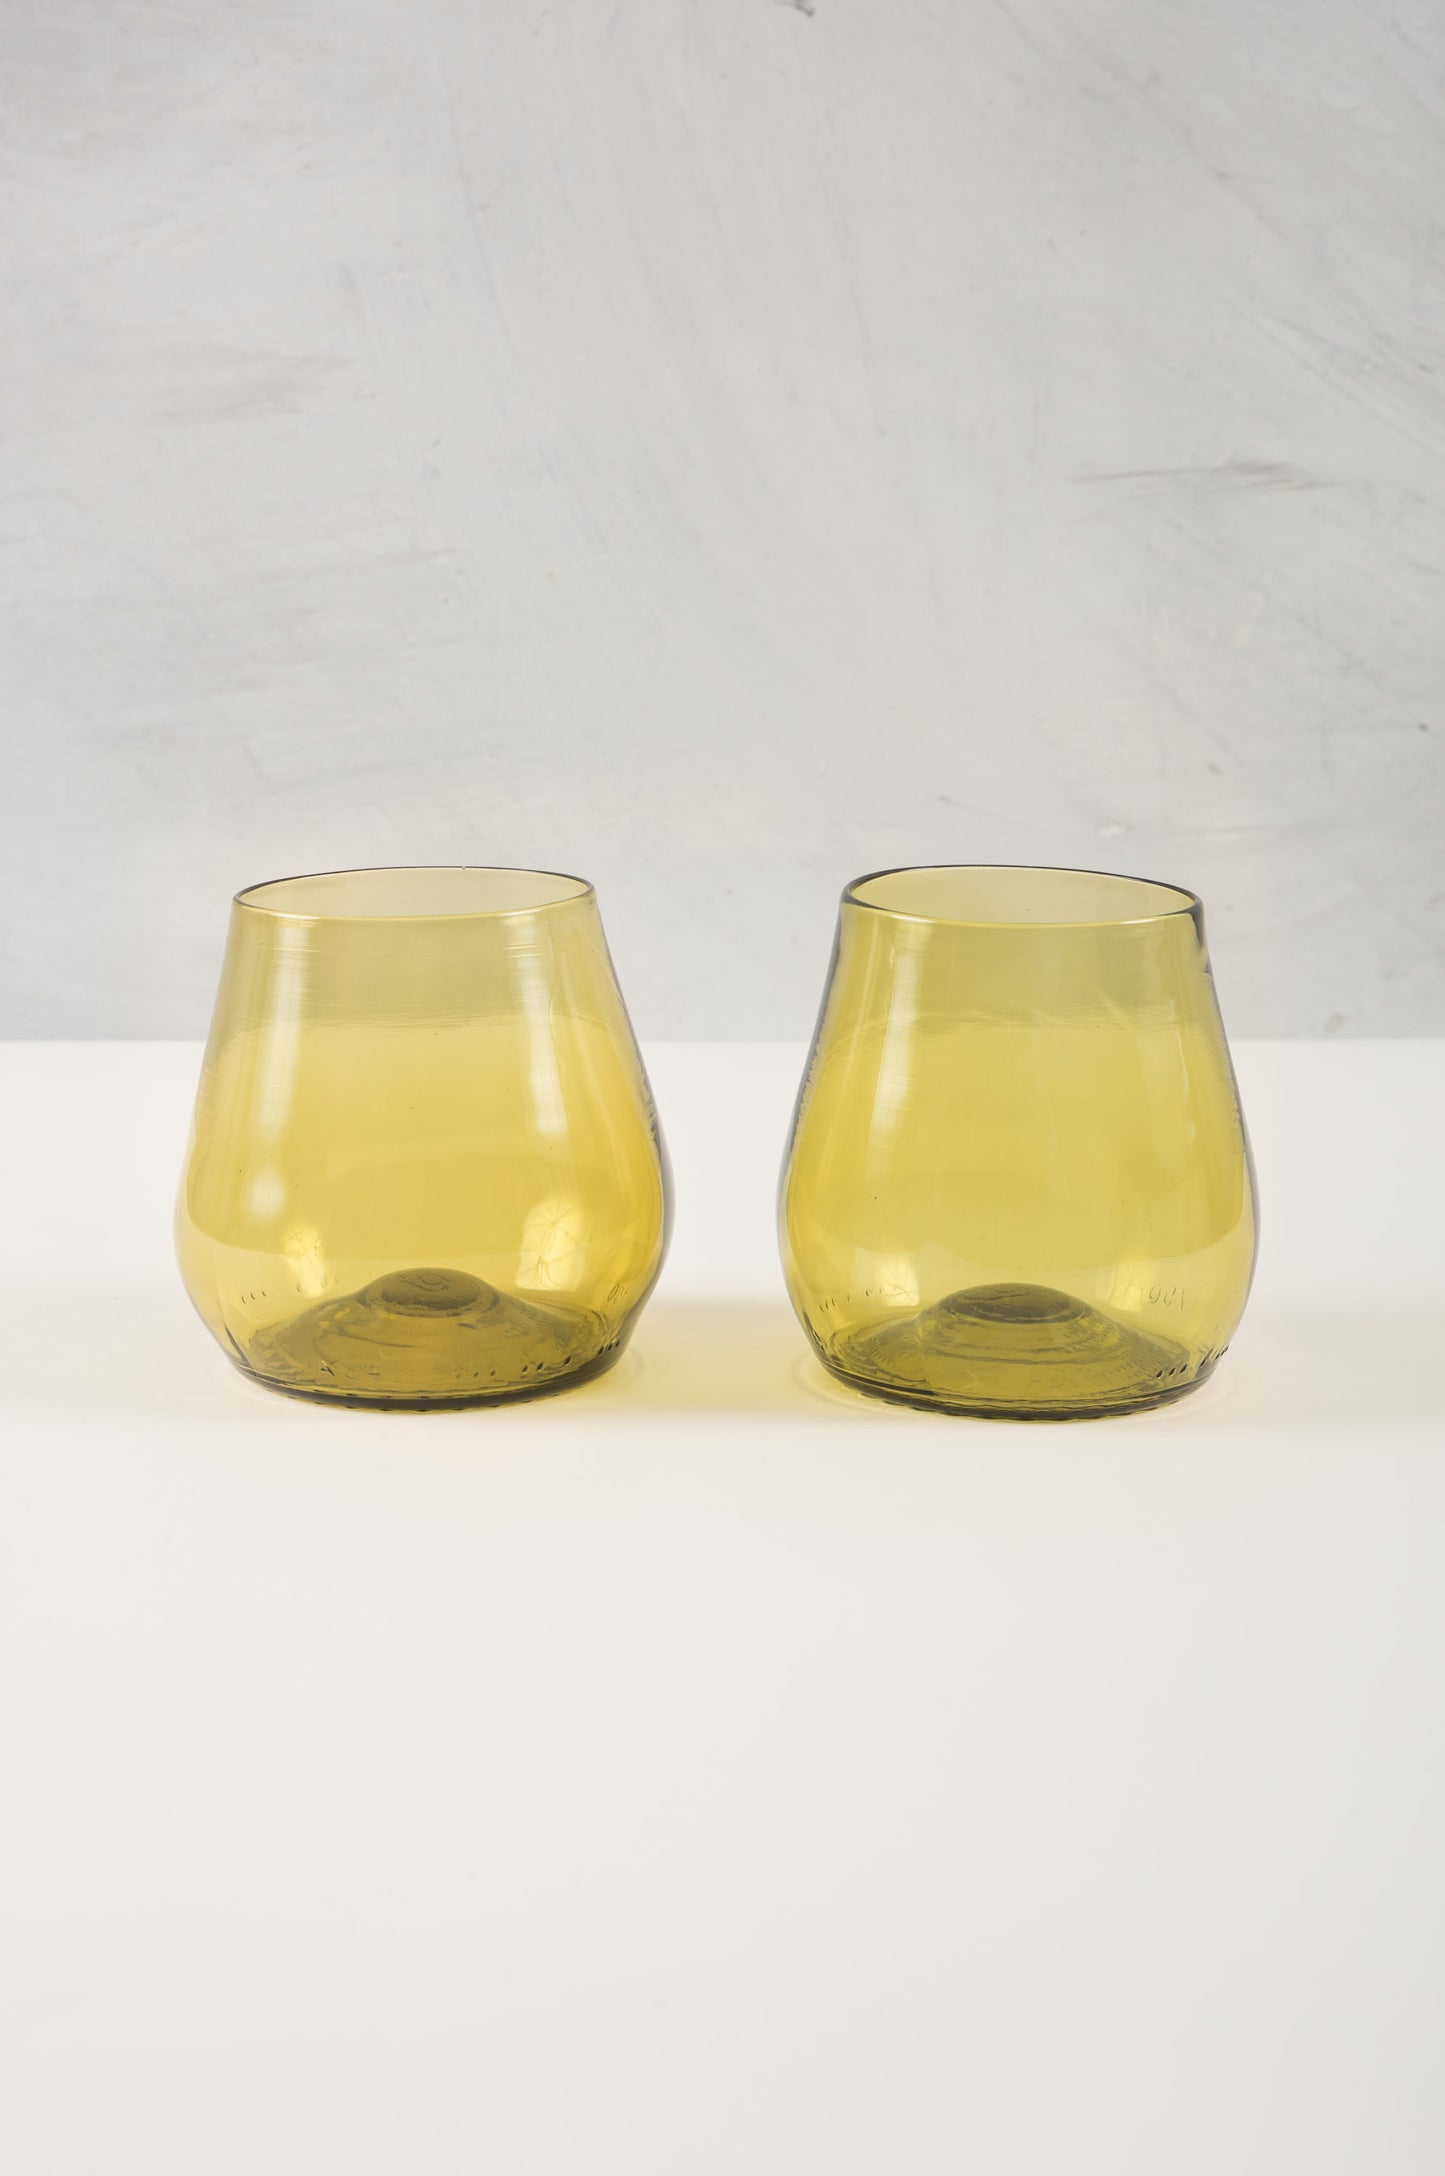 gold water or wine glasses made from recycled glass